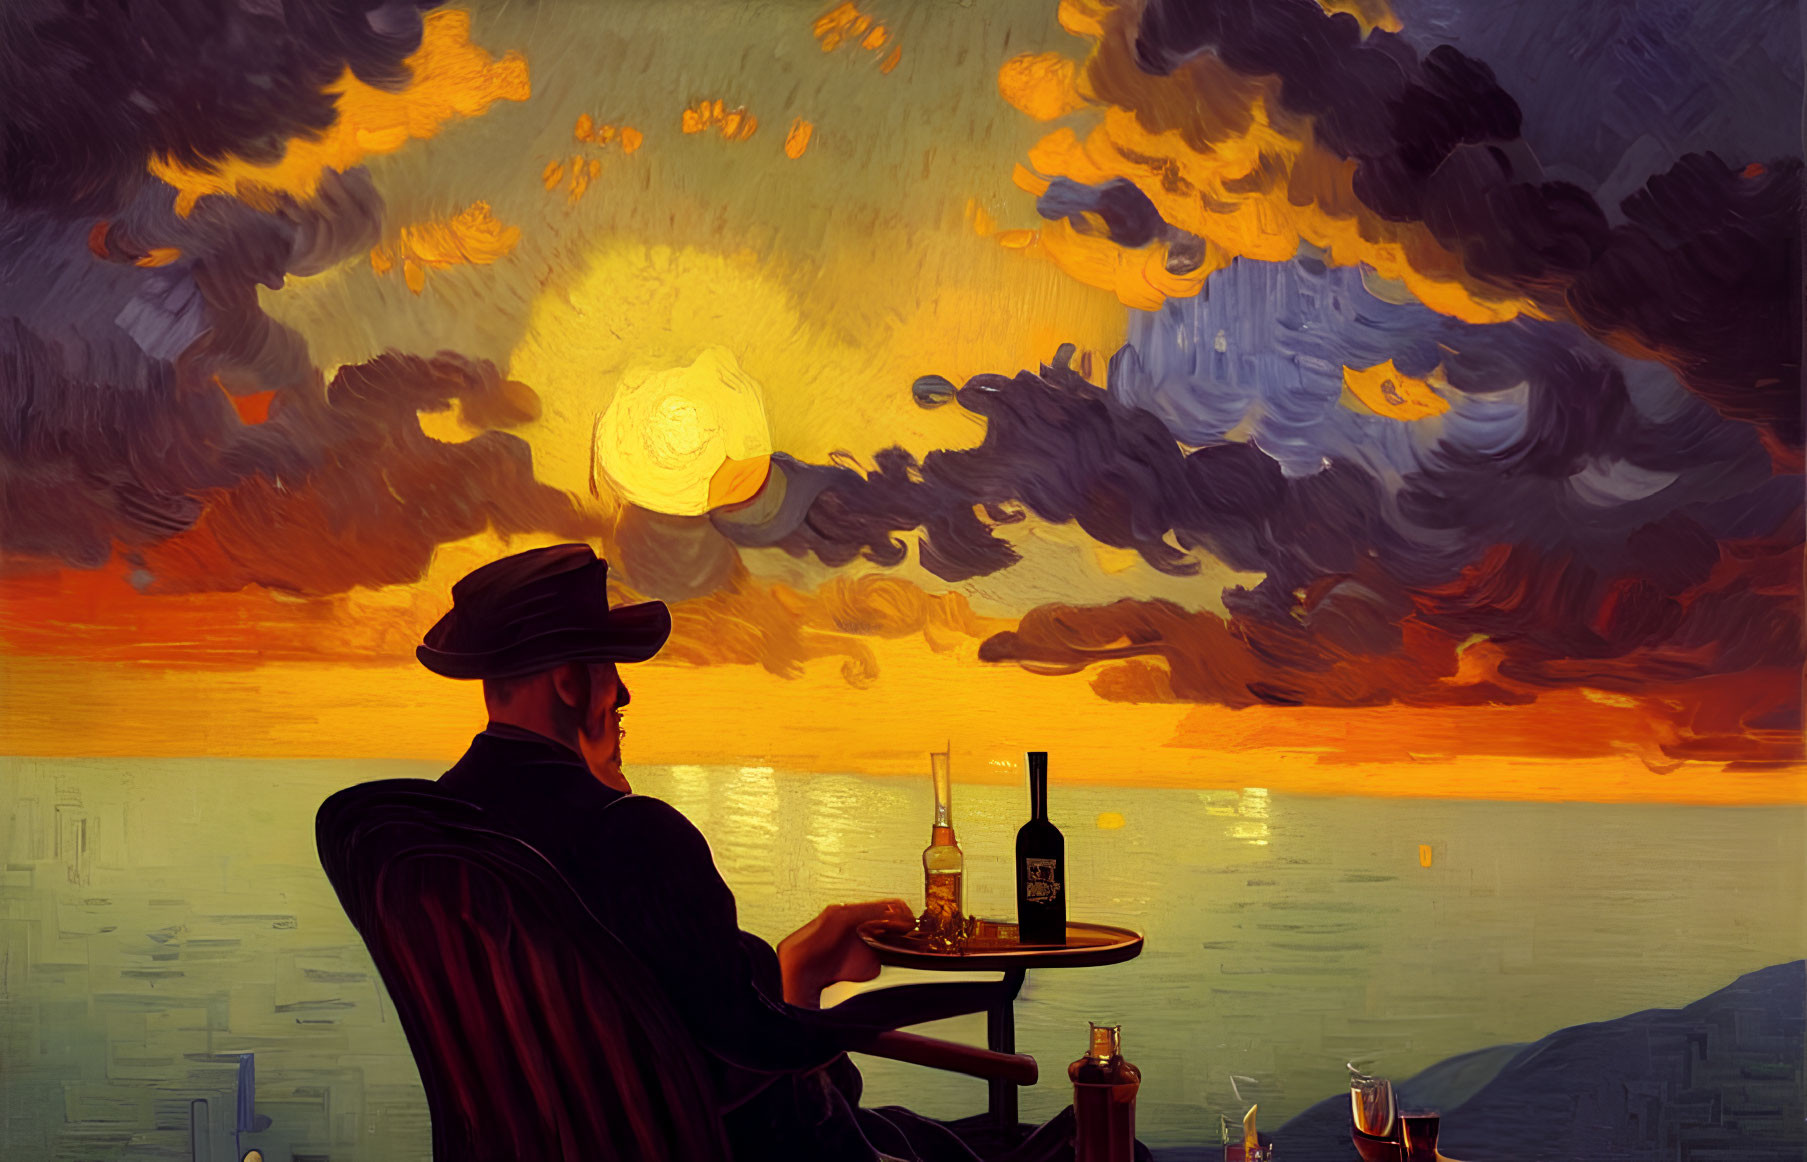 Person in hat admires sunset by water with dramatic clouds